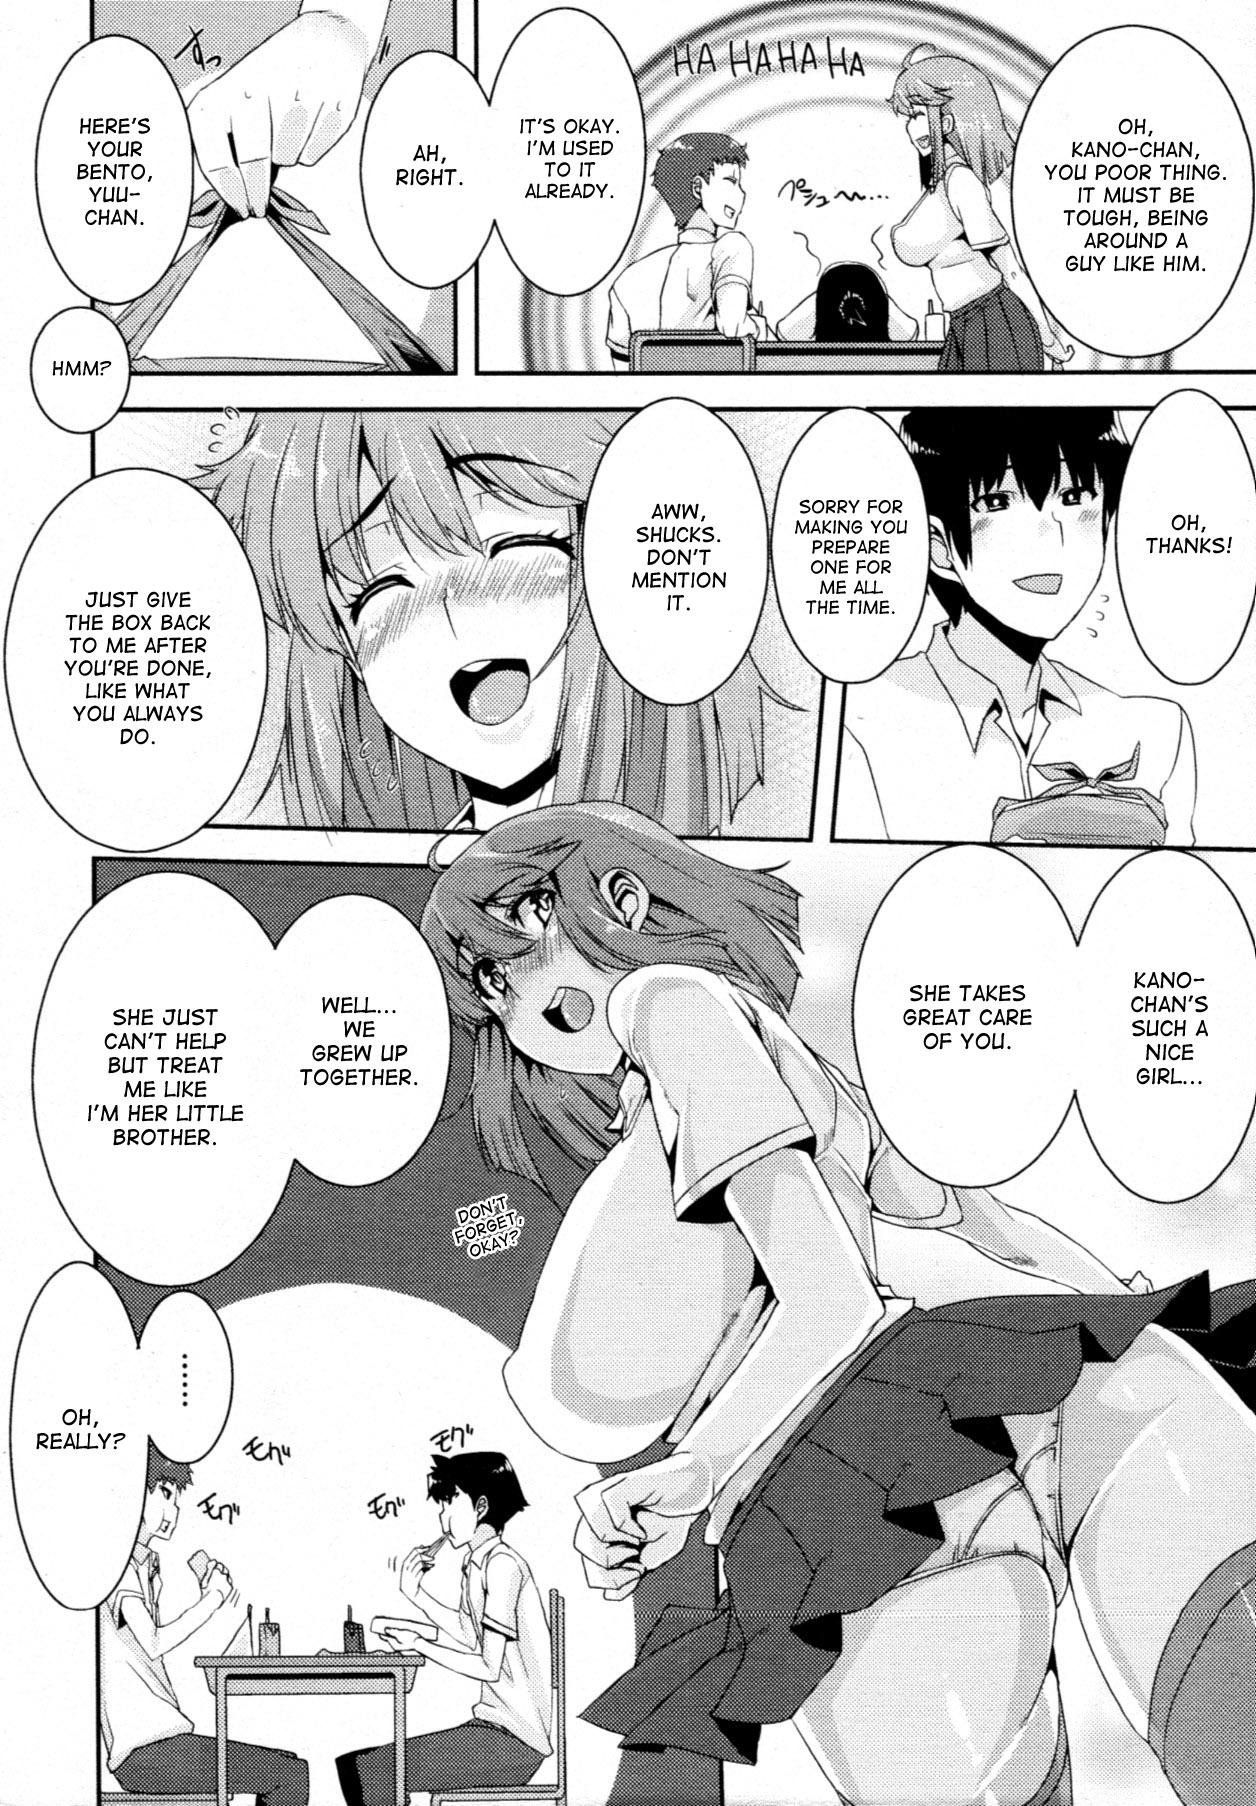 New Chijo-sama no Jijou | The Perverted Lady's Circumstances Affair - Page 4